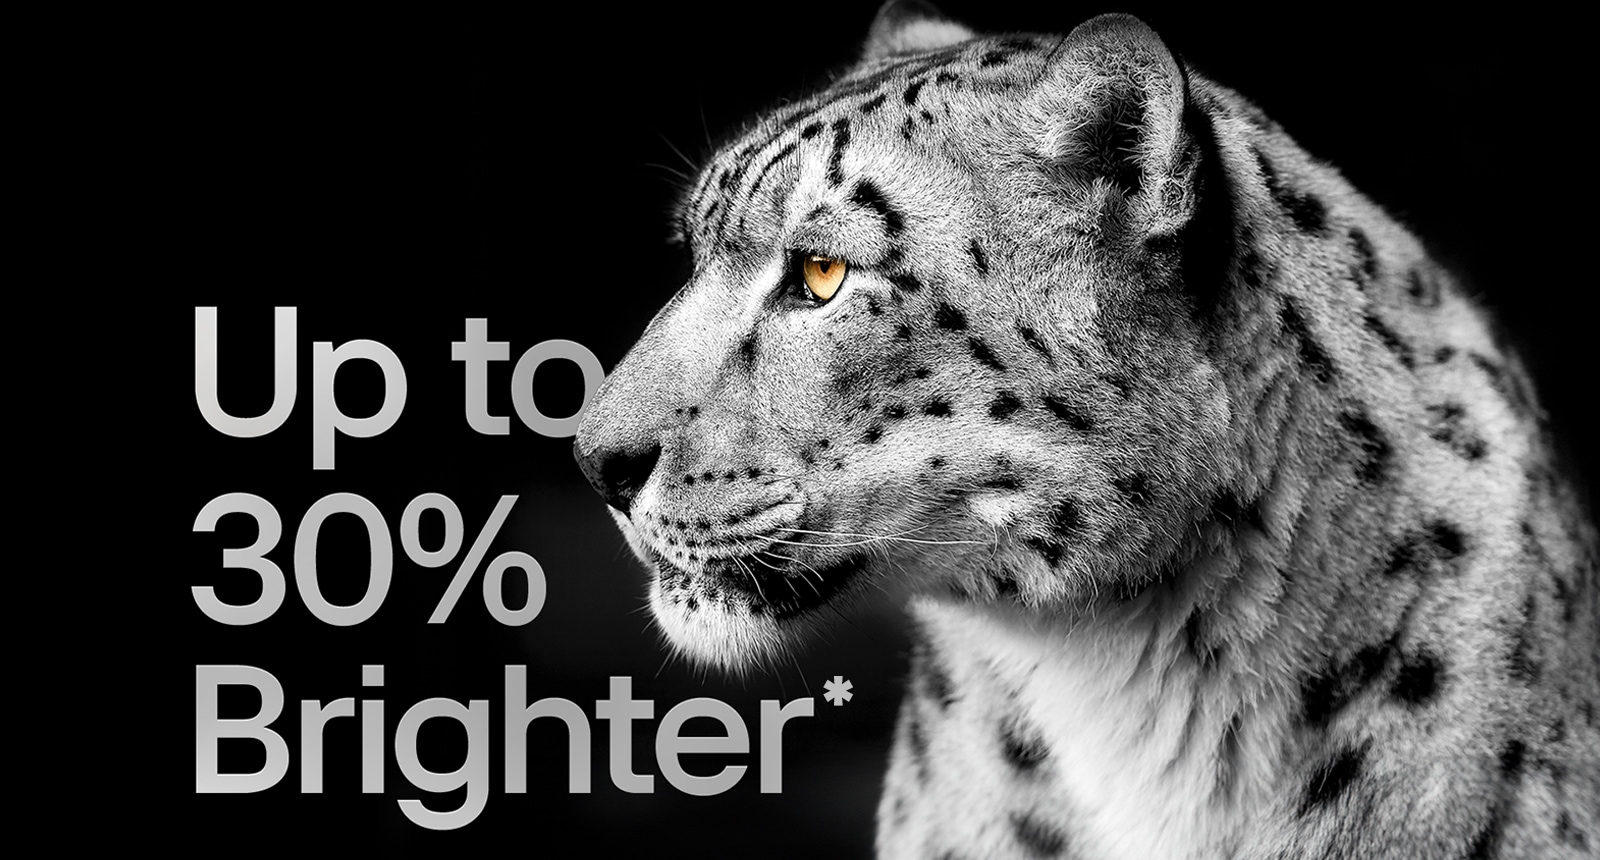 An image of a white leopard showing its side face on the left side of the image. The words "Up to 30% brighter" appear on the left.